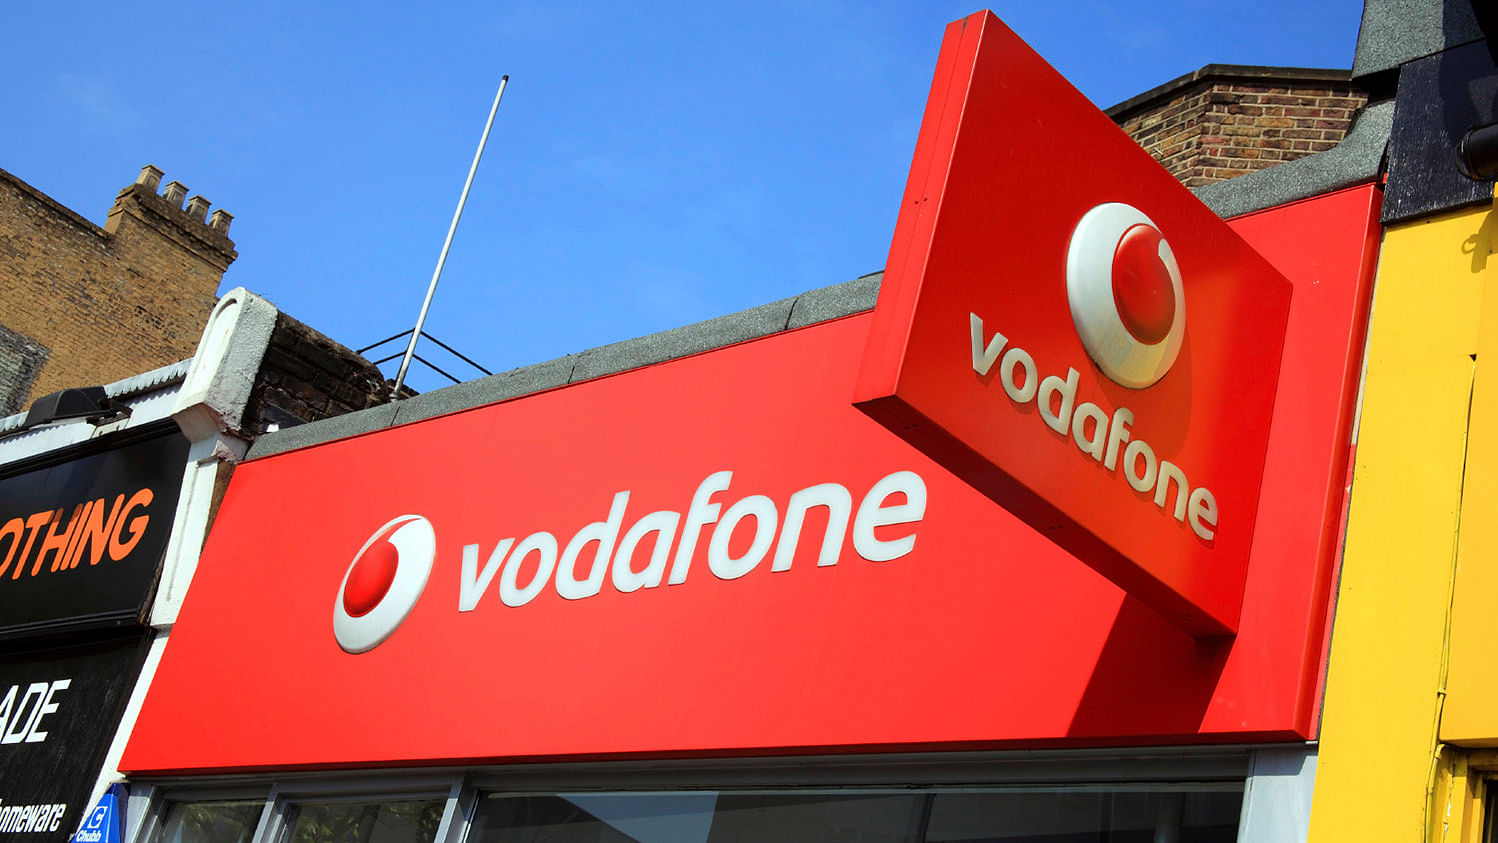 Vodafone is set to rival Airtel, Reliance Jio for 4G service in India. (Photo: iStockphoto)